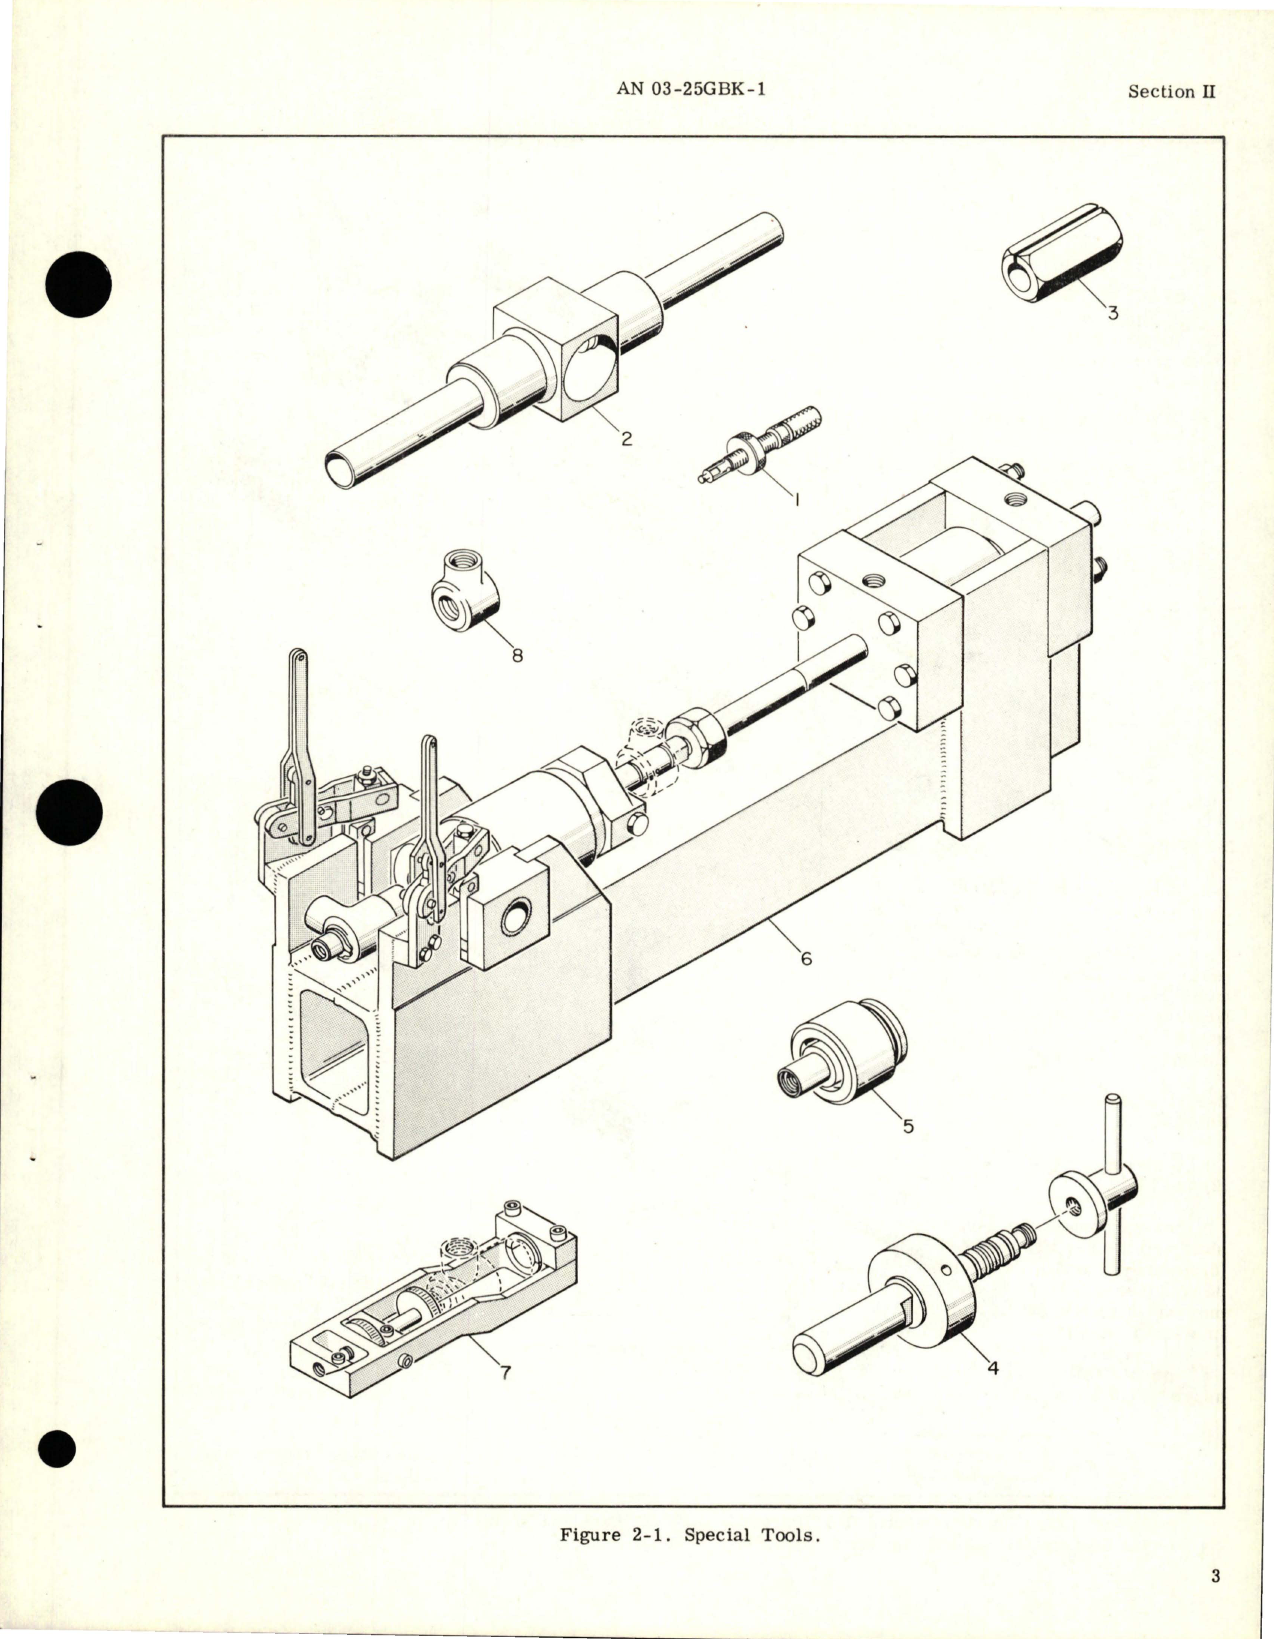 Sample page 7 from AirCorps Library document: Overhaul Instructions for Hydraulic Power Cylinders - Parts 10370-3, 10370-3A, 10380-3, and 10380-3A